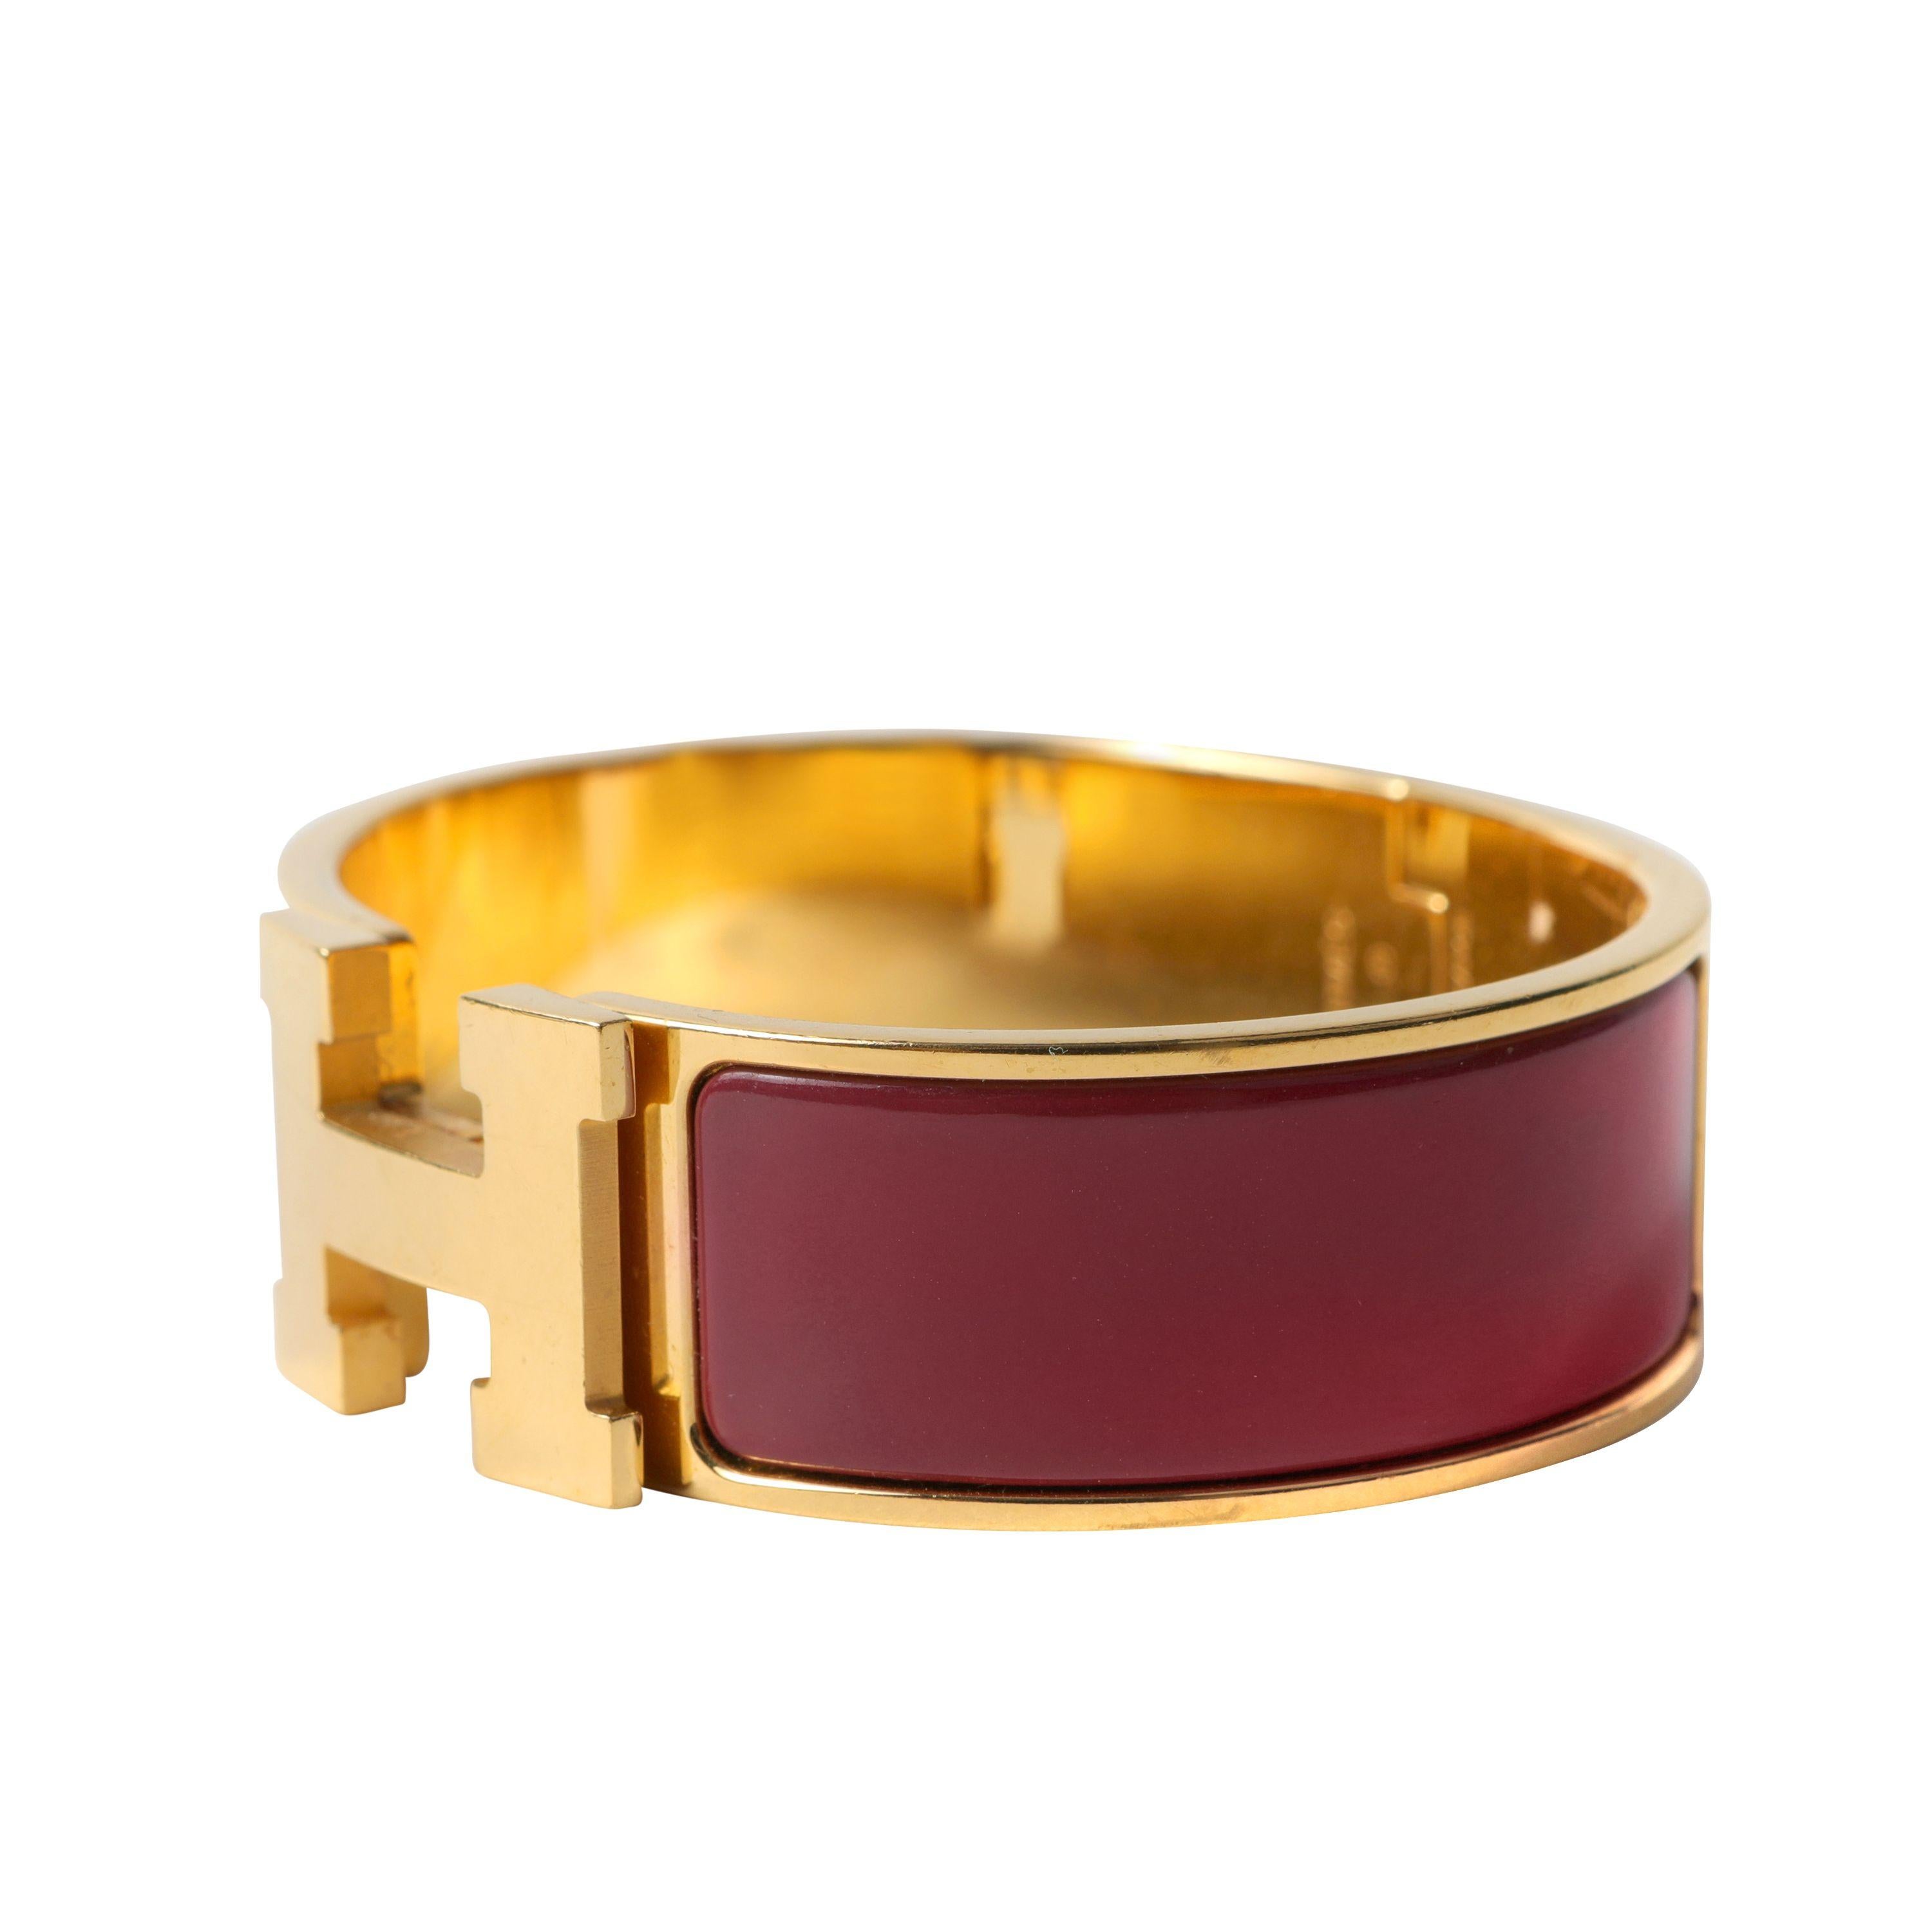 This authentic Hermès Burgundy Wide Clic Clac Bracelet is in excellent condition.  Burgundy enamel with gold tone hardware and swivel H closure.  Pouch or box included.

PBF 13818
